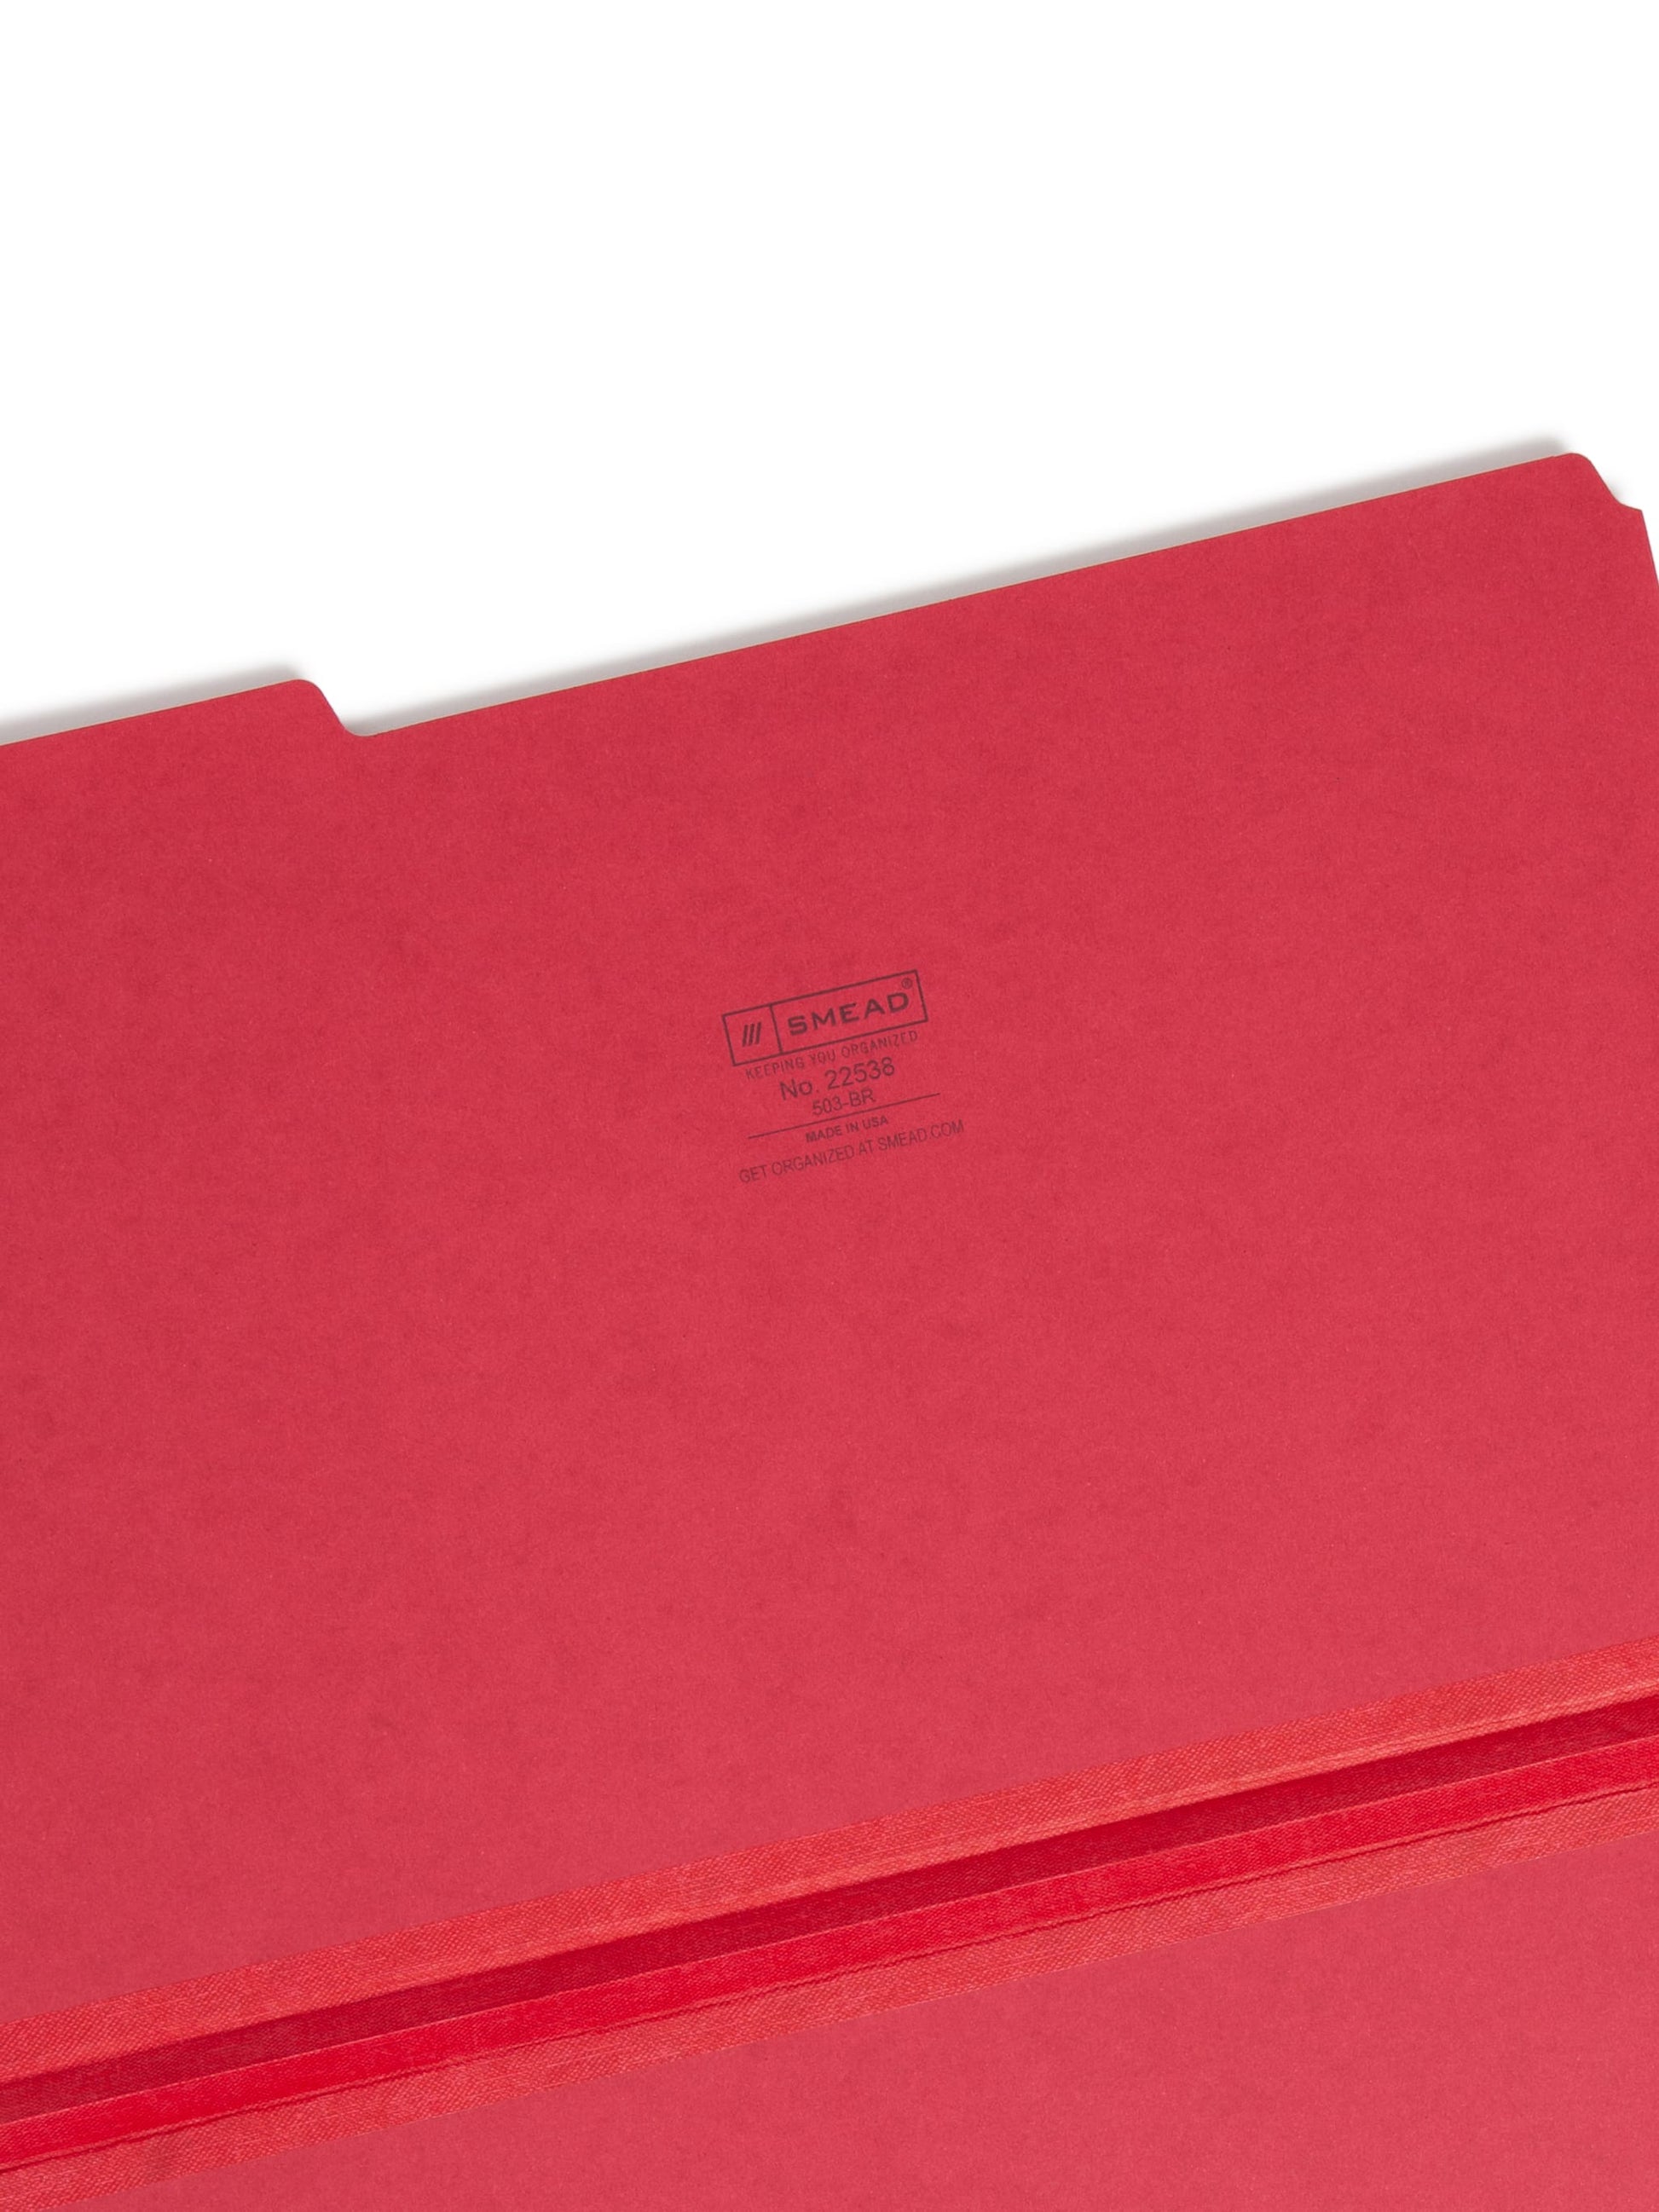 Pressboard File Folder, 1 inch Expansion, 1/3-Cut Tab, Bright Red Color, Legal Size, Set of 25, 086486225380